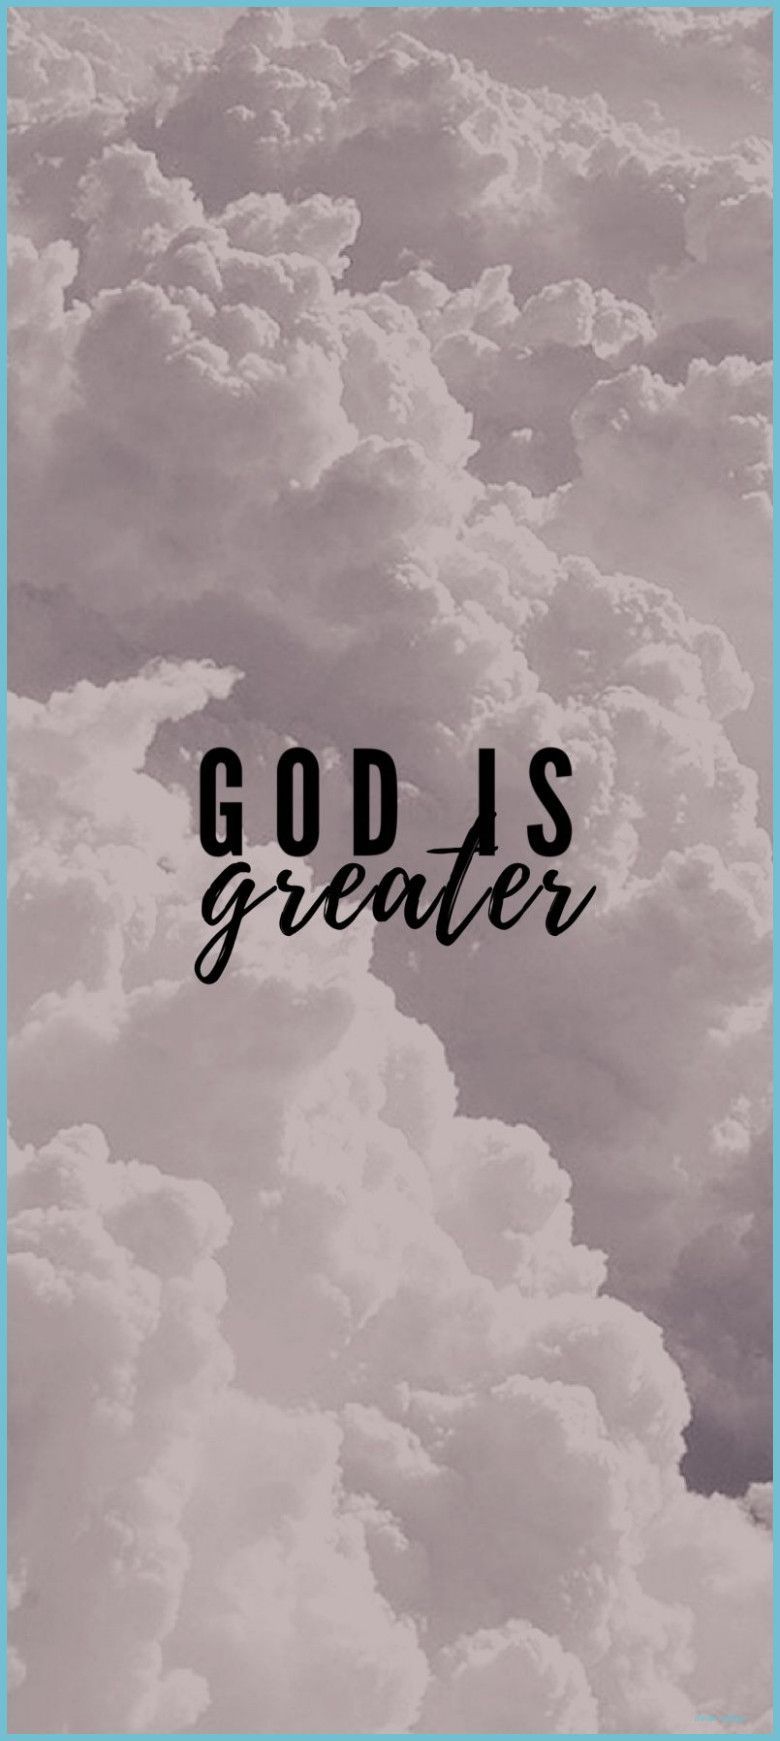 God is greater than the storm. - Christian iPhone, Christian